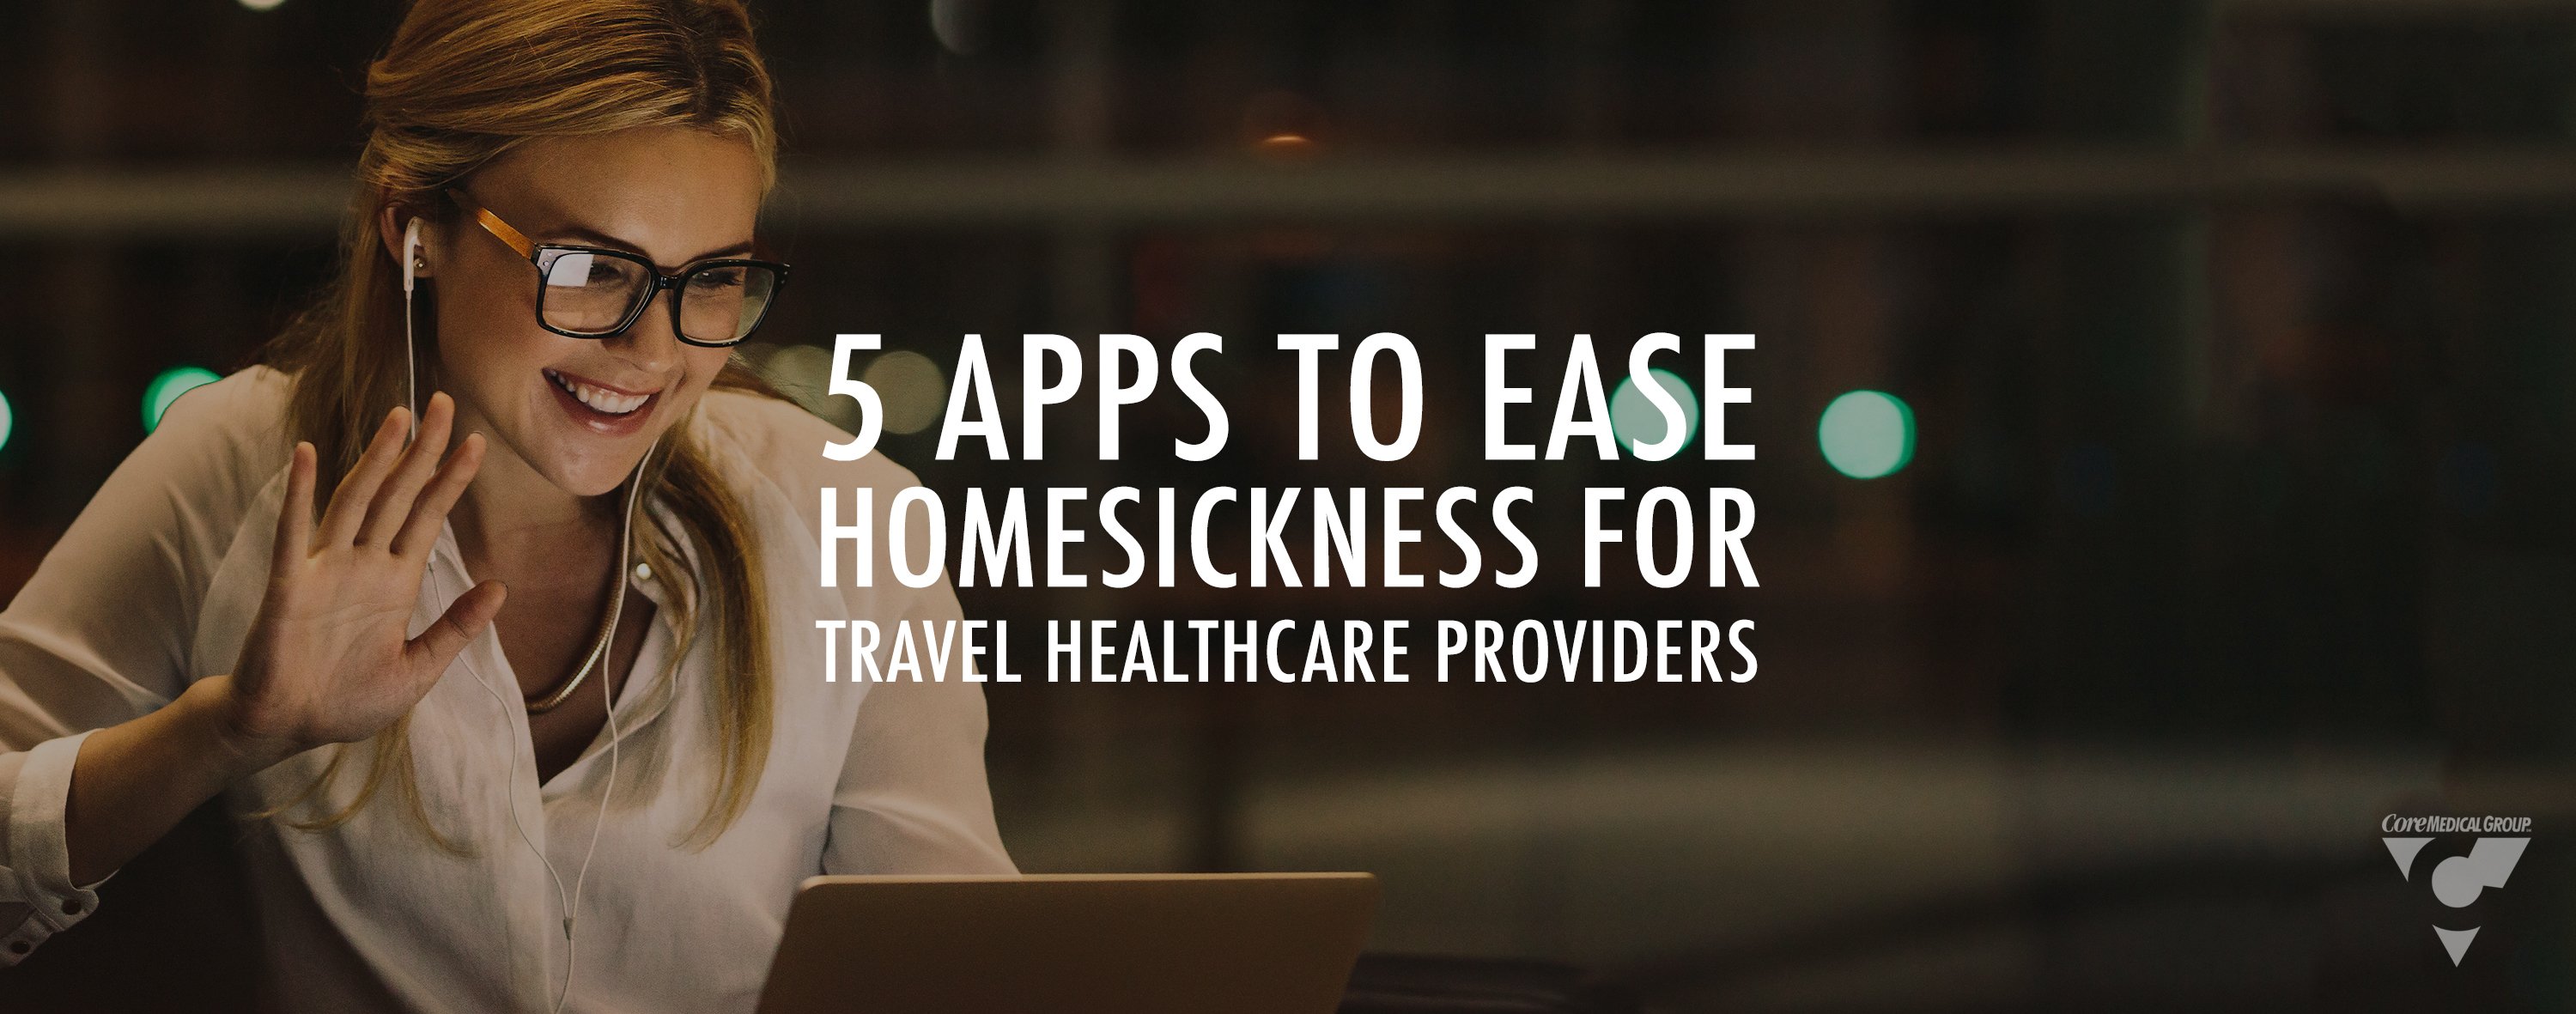 Core Medical Group CMG 5 Apps to eases homesickness for travel healthcare providers